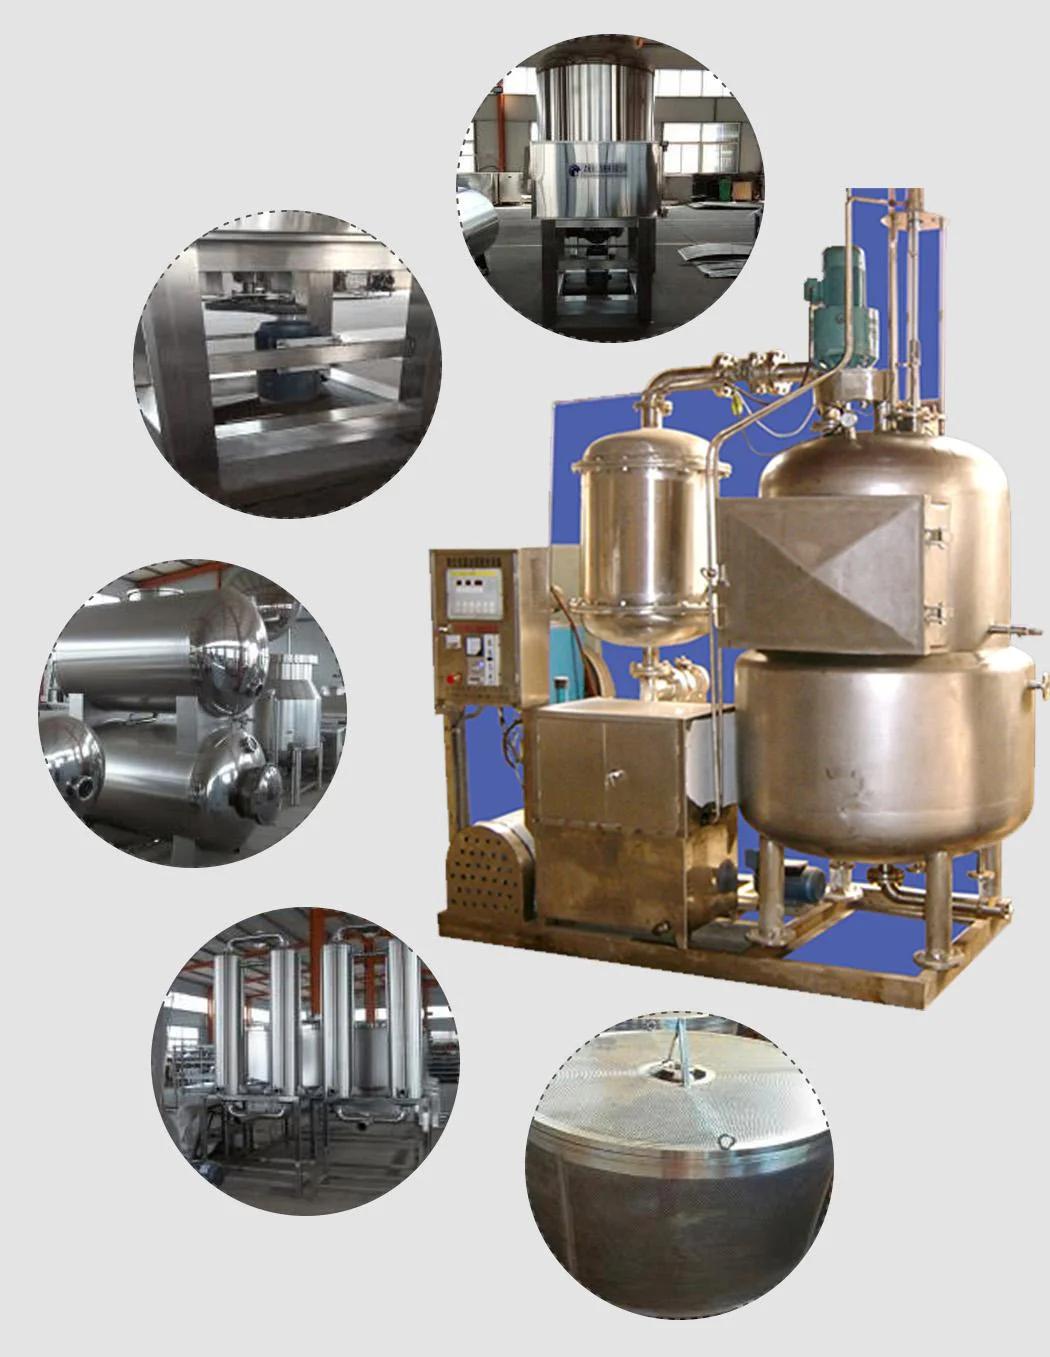 Automatic Vegetables Frying Line/Vacuum Frying Machinery with Ce Approved for Sale